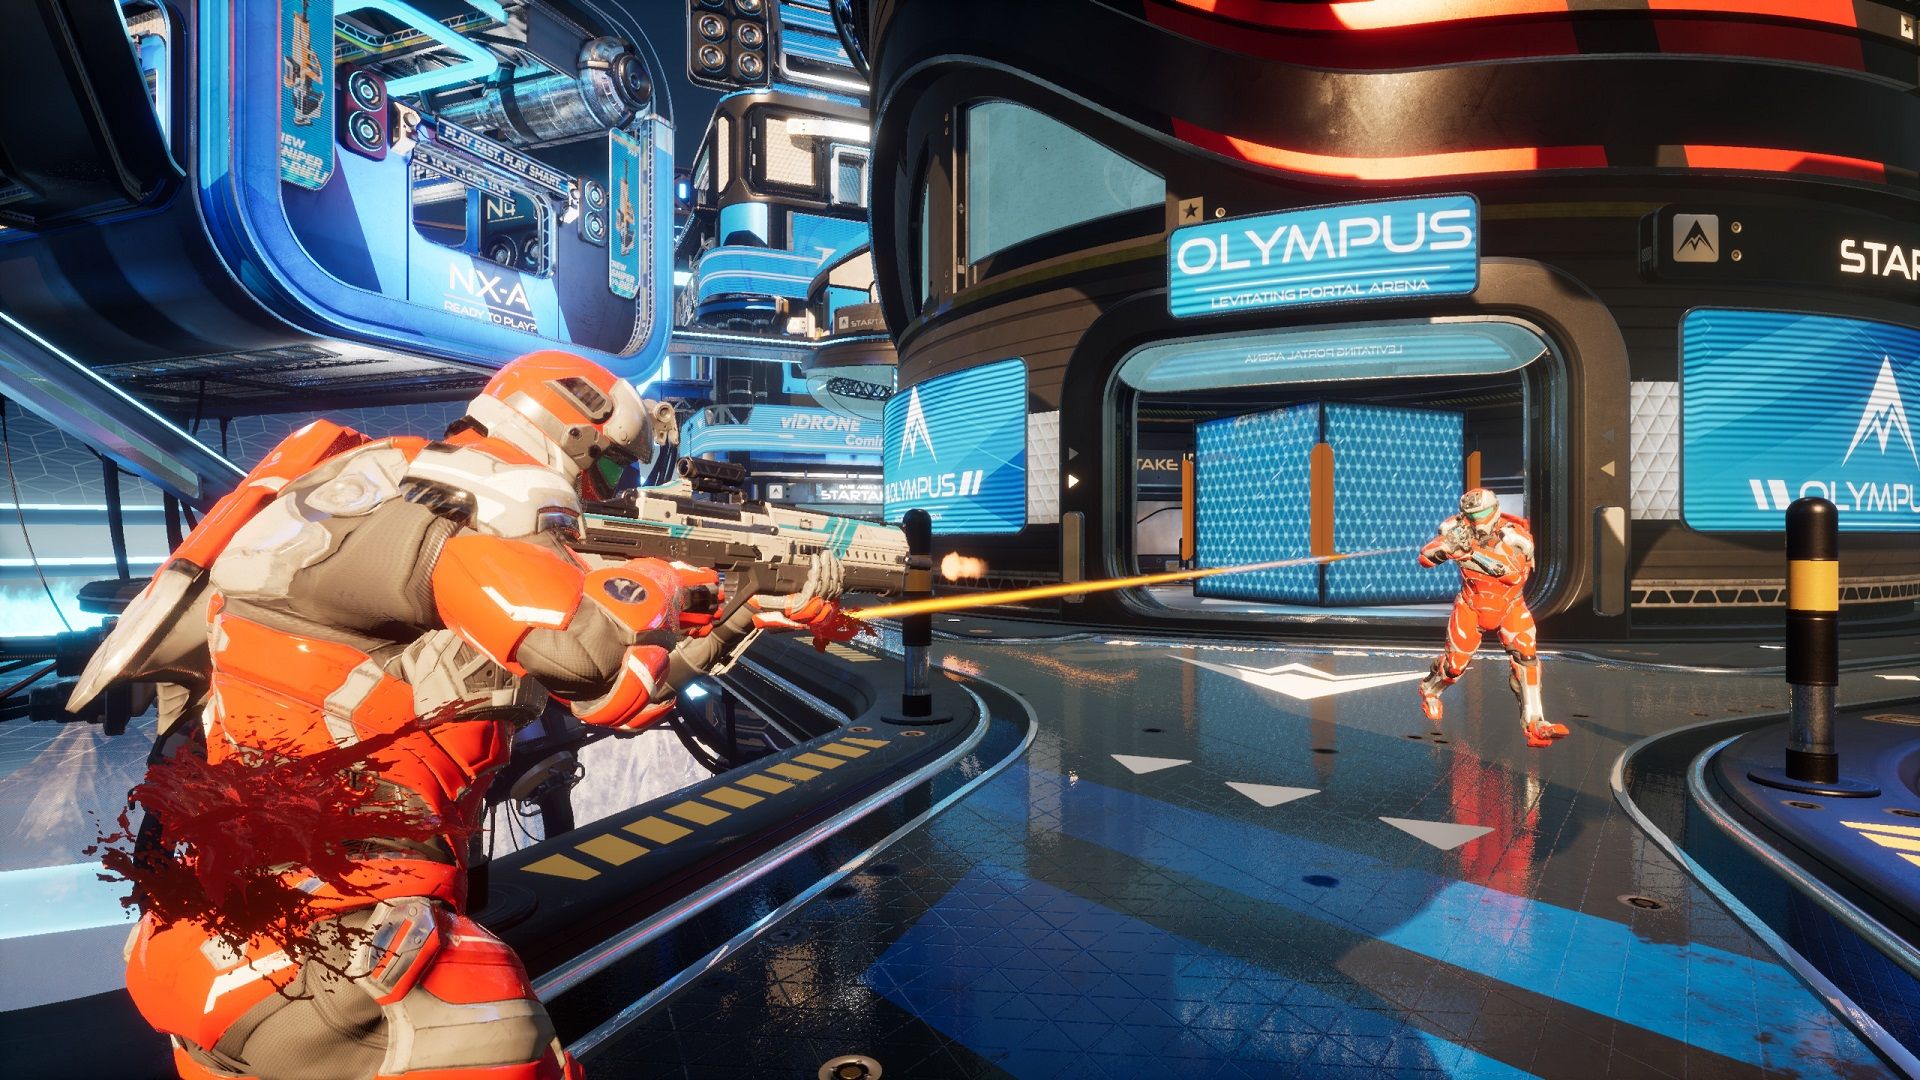 Splitgate is a brand new first person arena shooter, and it's available for free now on Steam it's a refreshing. Unreal tournament, Tournaments, Games today